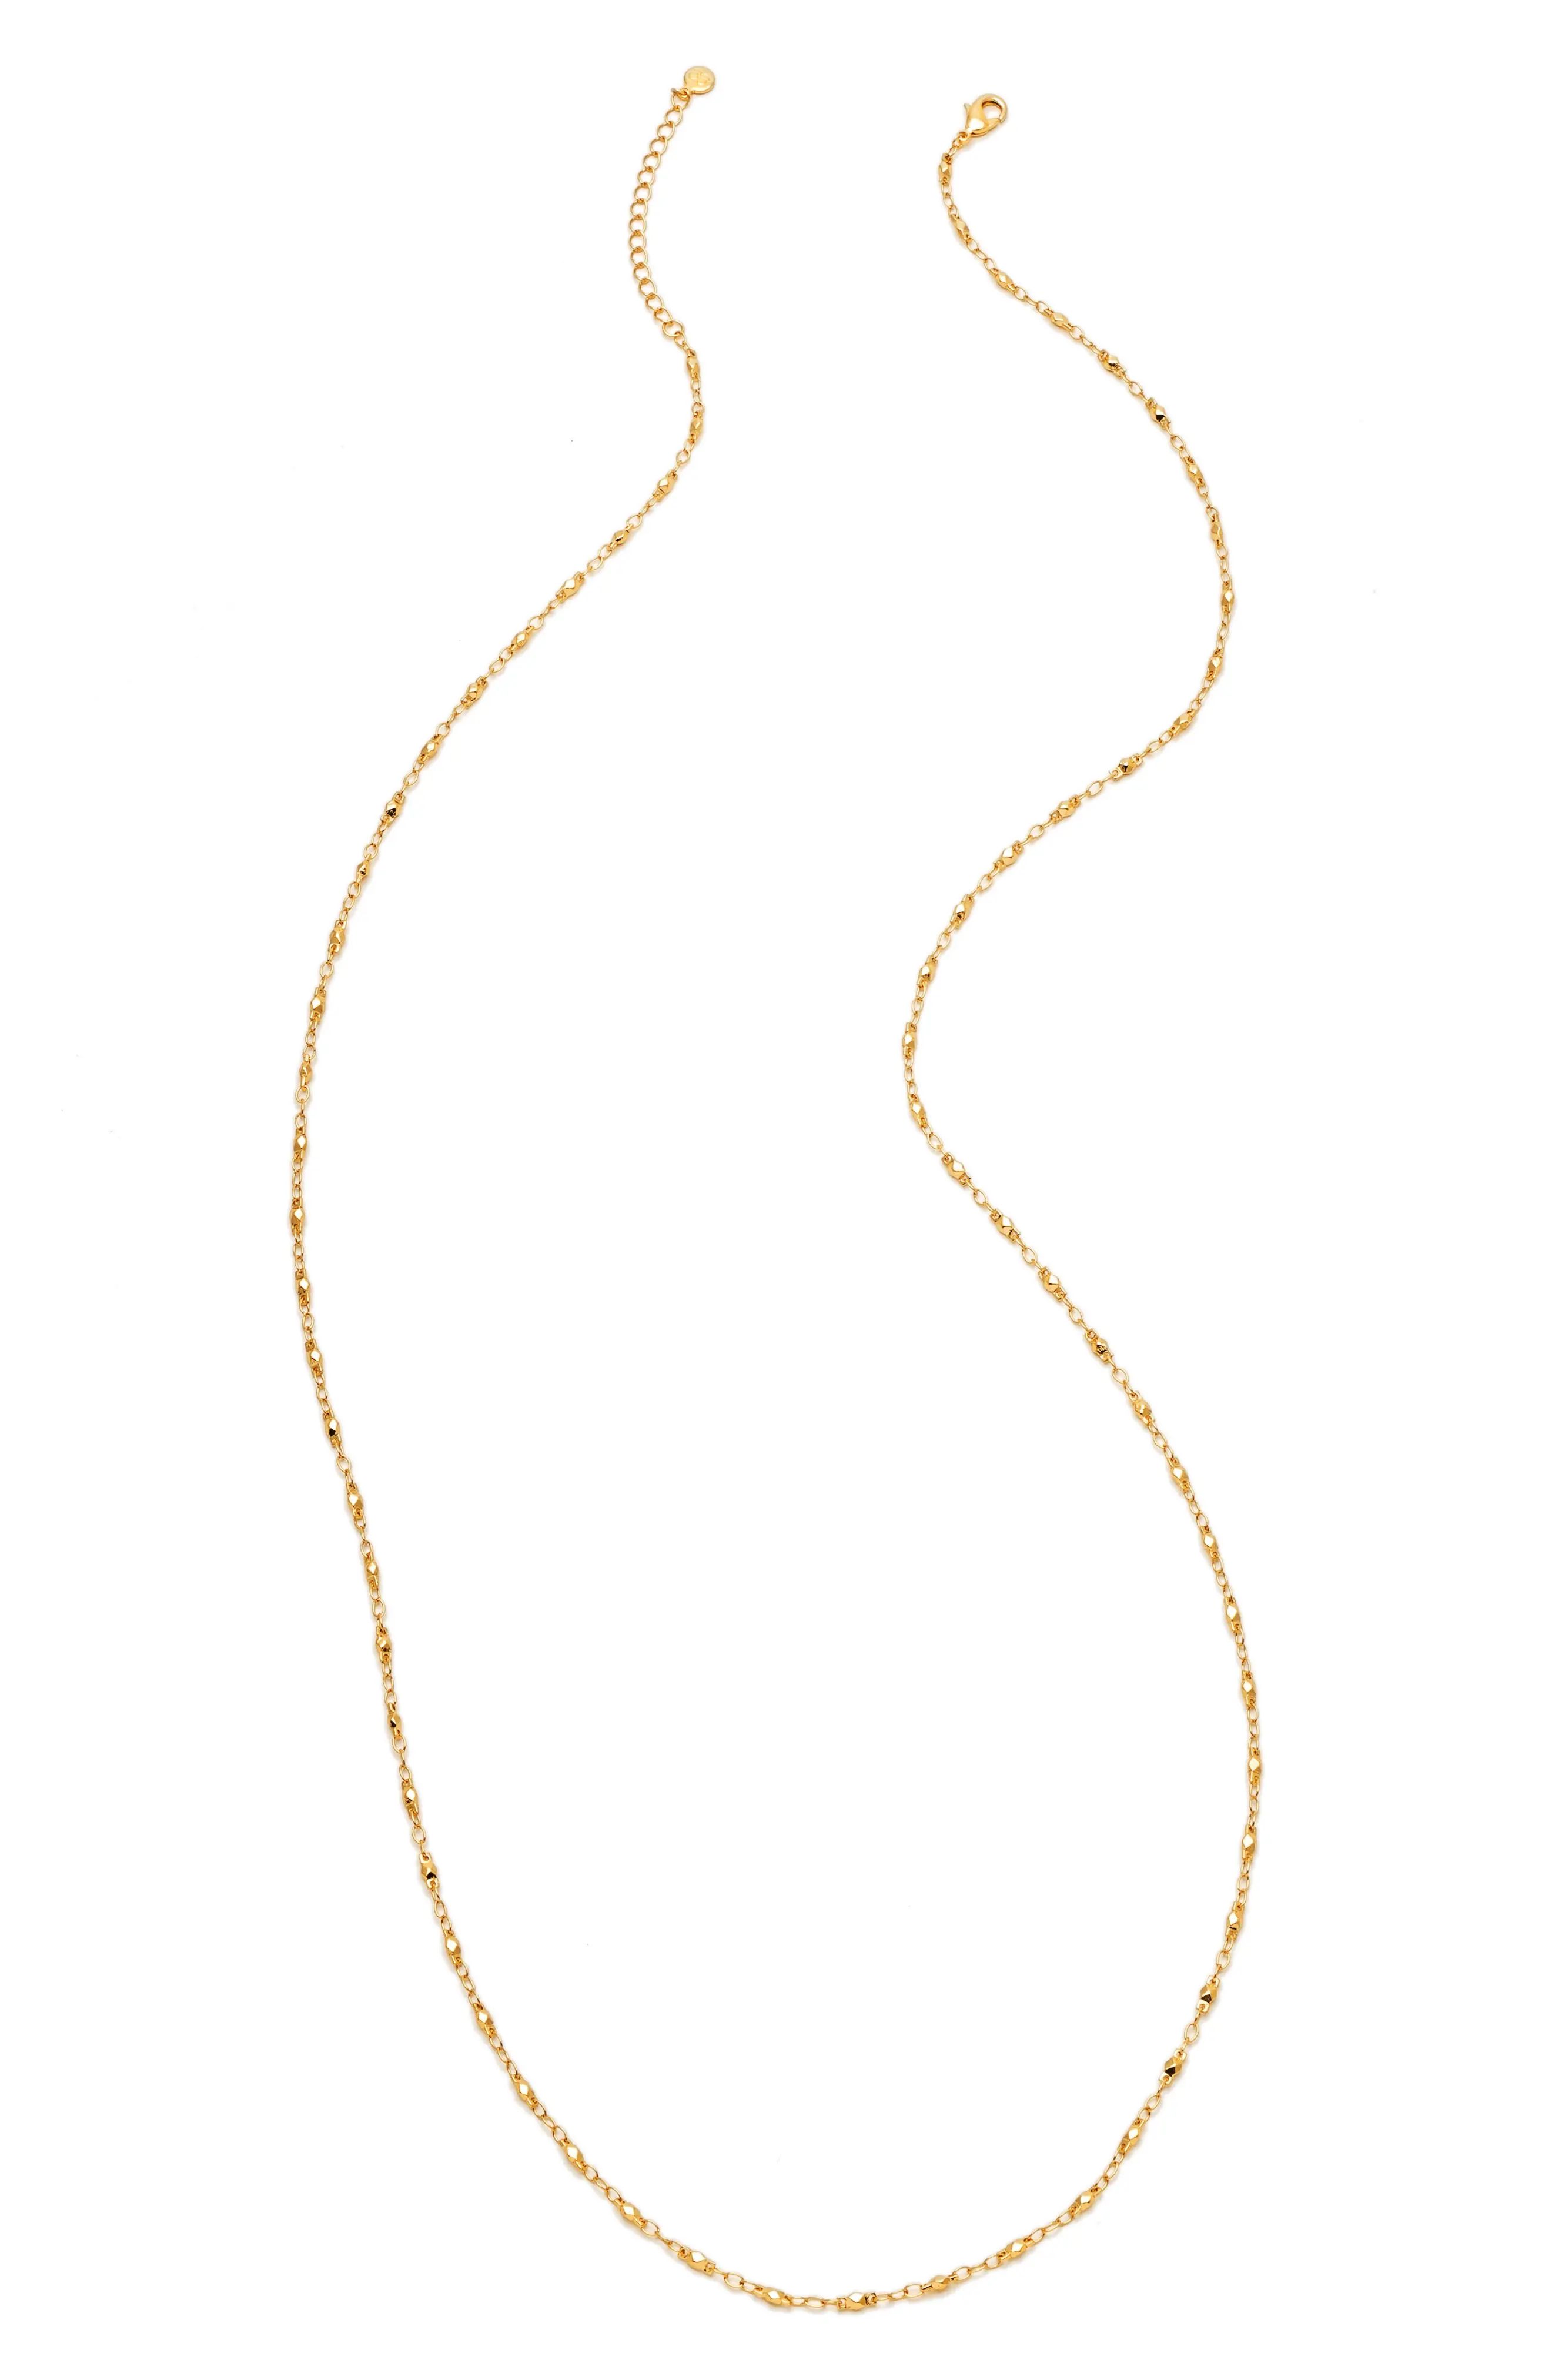 Multistrand Beaded Necklace | Nordstrom